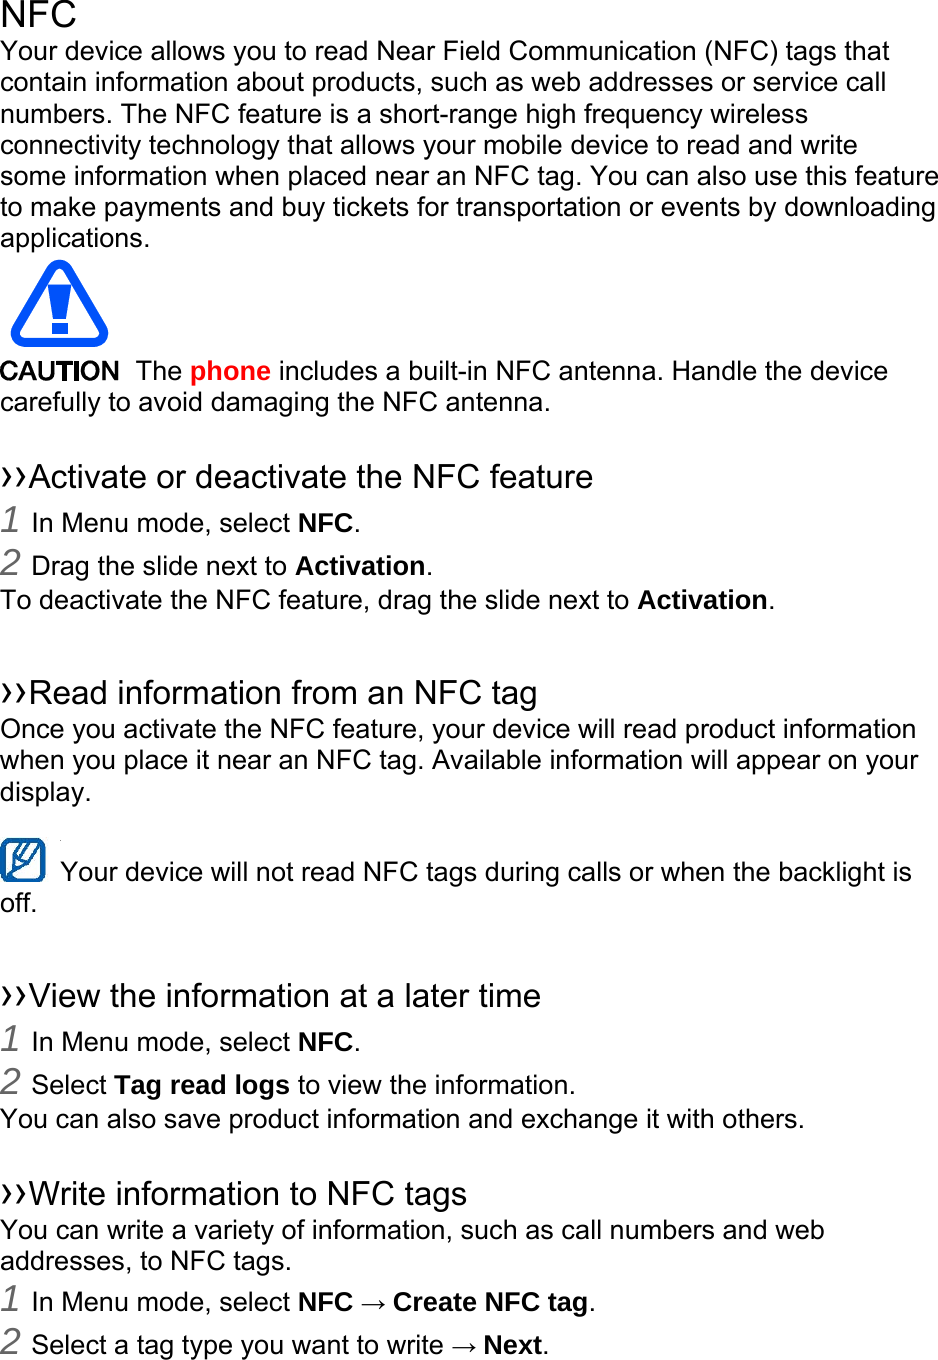  NFC Your device allows you to read Near Field Communication (NFC) tags that contain information about products, such as web addresses or service call numbers. The NFC feature is a short-range high frequency wireless connectivity technology that allows your mobile device to read and write some information when placed near an NFC tag. You can also use this feature to make payments and buy tickets for transportation or events by downloading applications.   The phone includes a built-in NFC antenna. Handle the device carefully to avoid damaging the NFC antenna.  ››Activate or deactivate the NFC feature 1 In Menu mode, select NFC. 2 Drag the slide next to Activation. To deactivate the NFC feature, drag the slide next to Activation.  ››Read information from an NFC tag Once you activate the NFC feature, your device will read product information when you place it near an NFC tag. Available information will appear on your display.  Your device will not read NFC tags during calls or when the backlight is   off.  ››View the information at a later time 1 In Menu mode, select NFC. 2 Select Tag read logs to view the information. You can also save product information and exchange it with others.  ››Write information to NFC tags   You can write a variety of information, such as call numbers and web addresses, to NFC tags. 1 In Menu mode, select NFC → Create NFC tag. 2 Select a tag type you want to write → Next. 